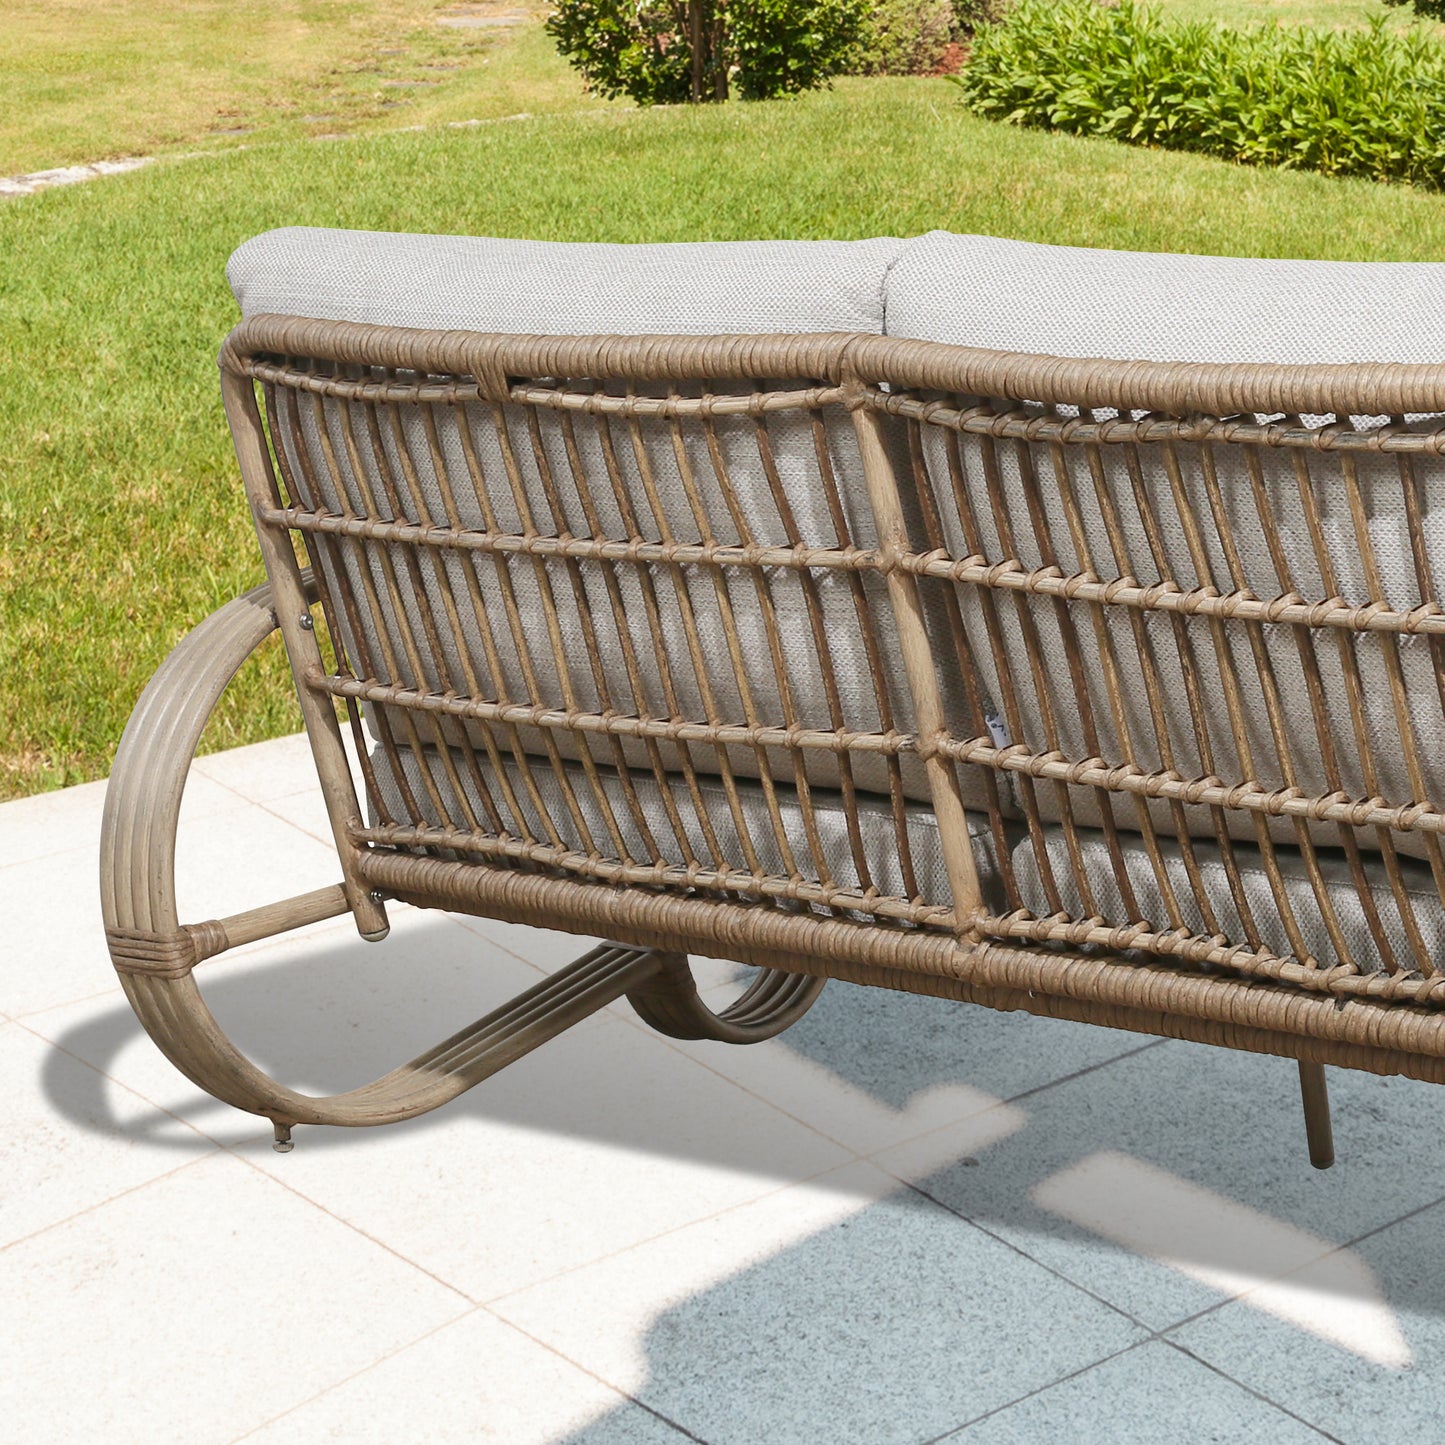 Patio Aluminum Loveseat Wicker 2 Person Bench Outdoor Sofa Chair with Olefin Cushions